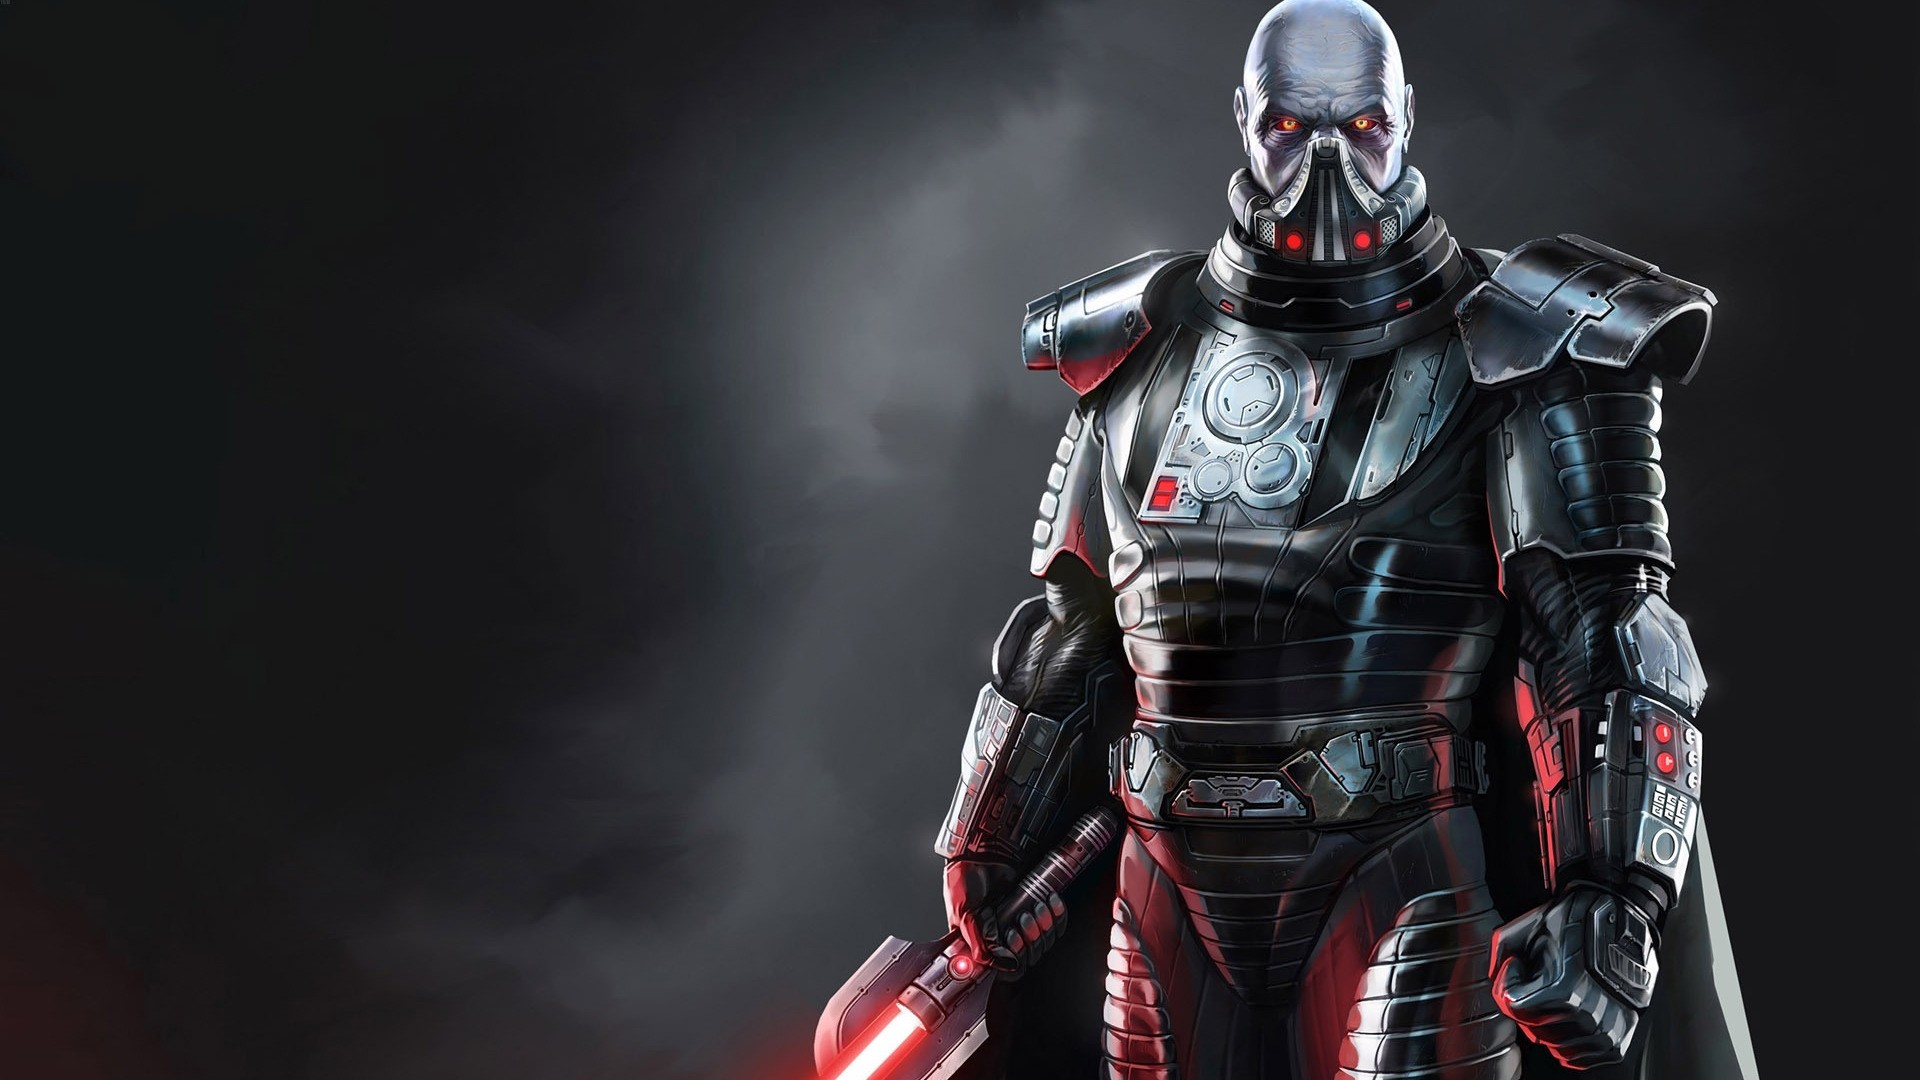 Star Wars Sith Wallpapers High Definition